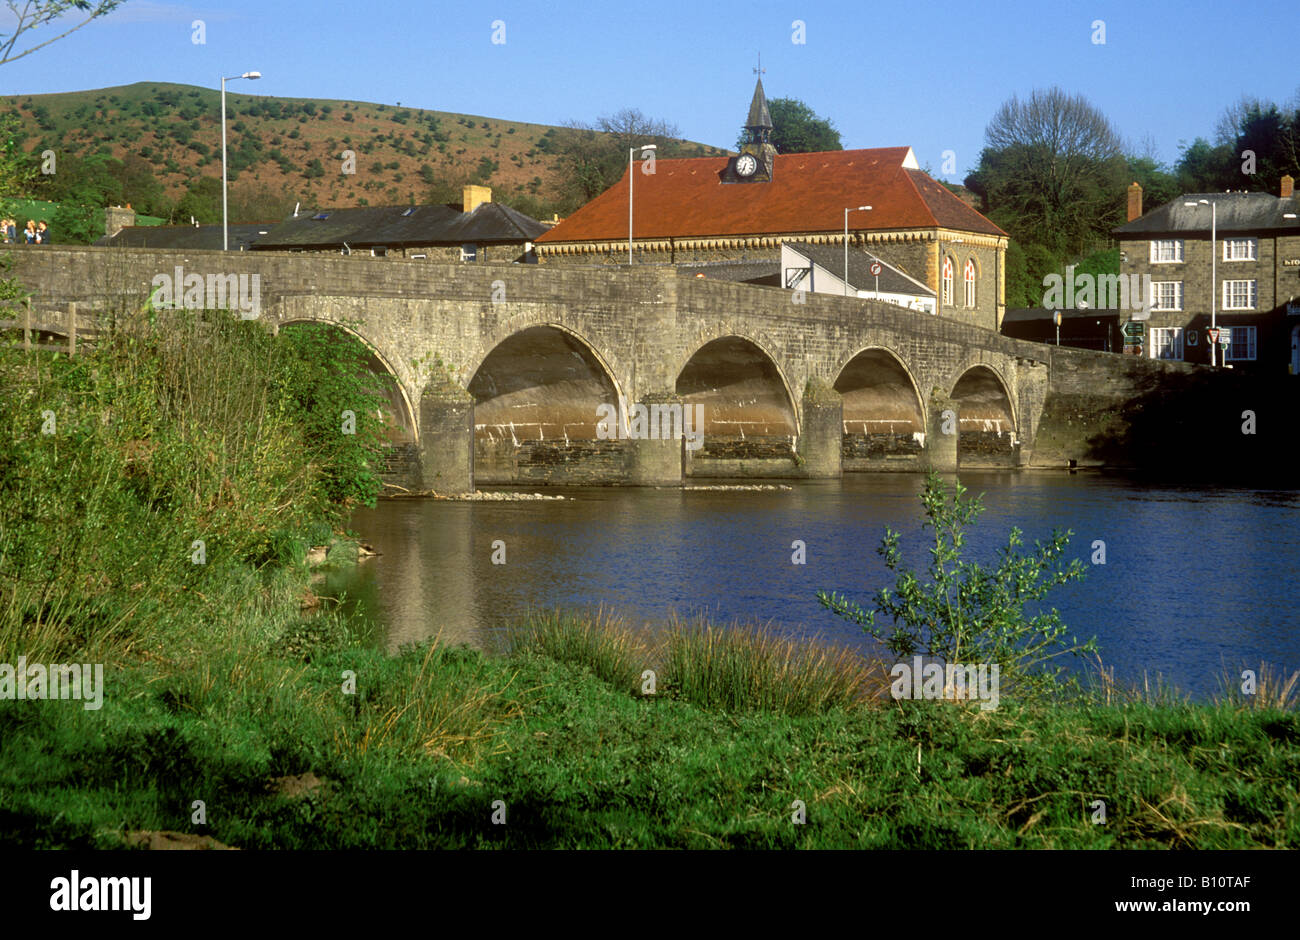 Builth Wells - Farming Centre and market town on the River Wye Stock Photo